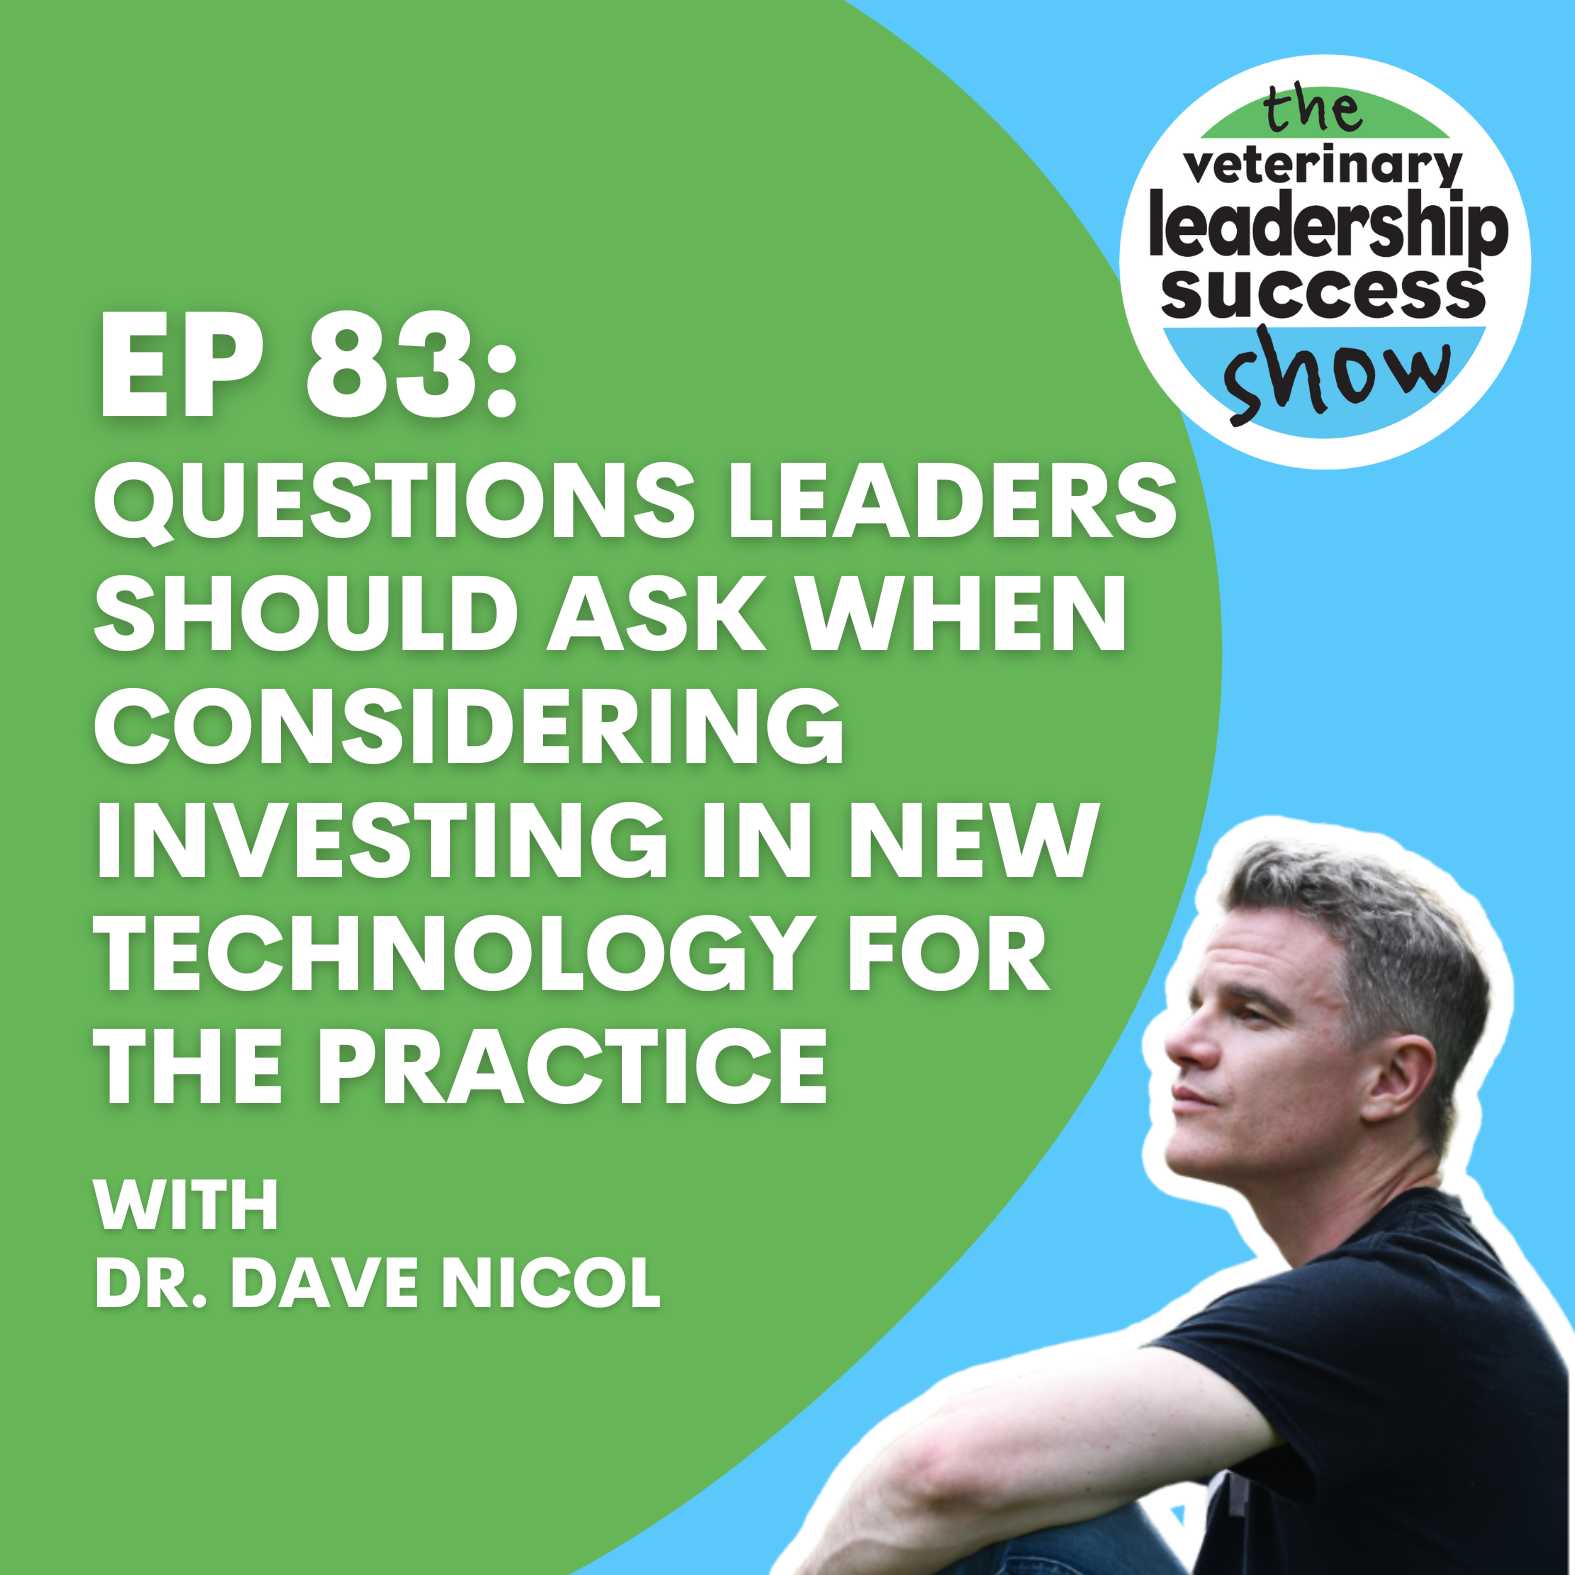 Ep 83: Questions Leaders Should Ask When Considering Investing In New Technology For The Practice